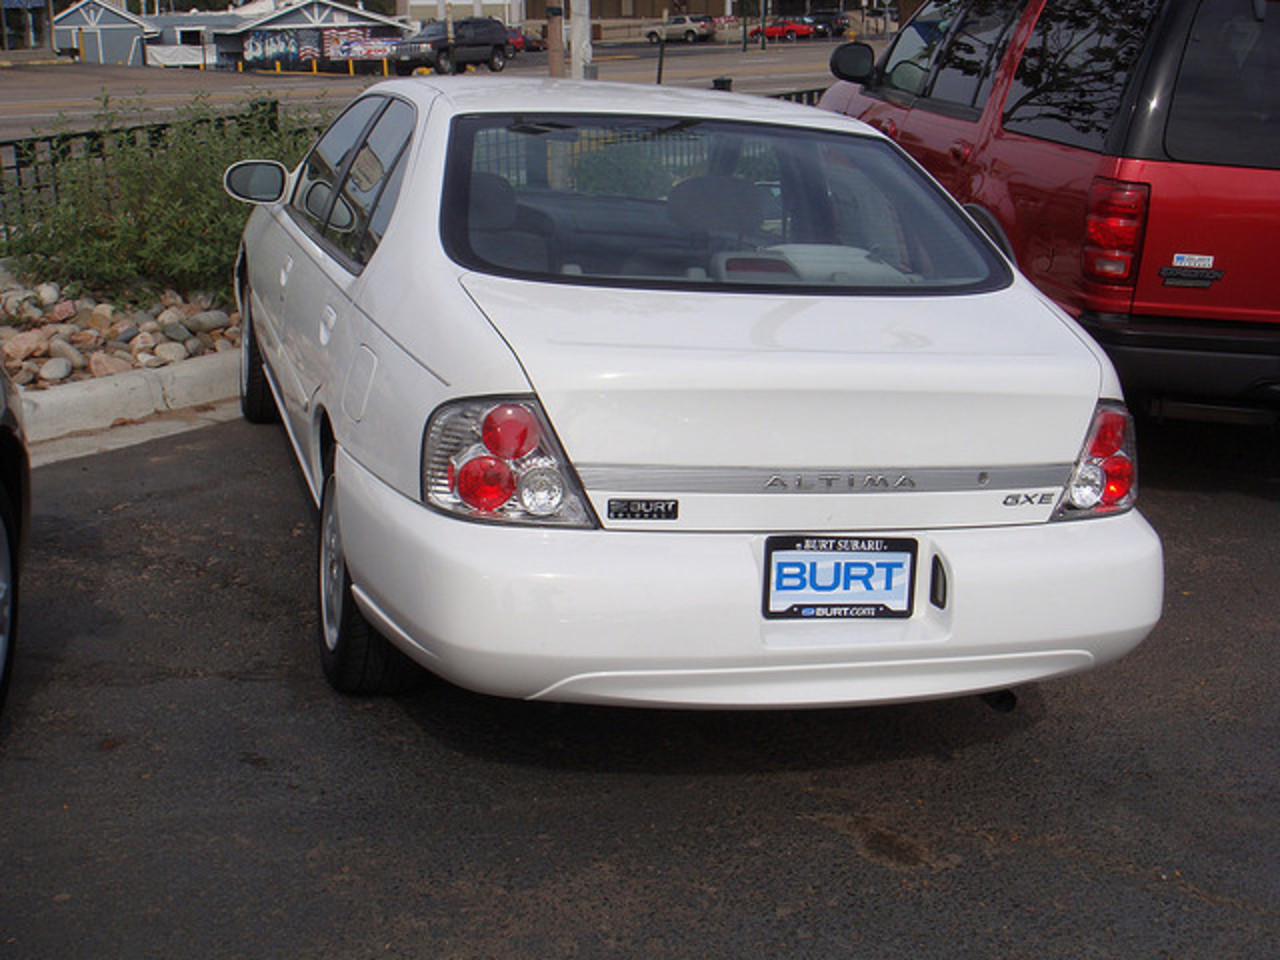 Nissan Altima GXE 2001 (Back View) | Flickr - Photo Sharing!